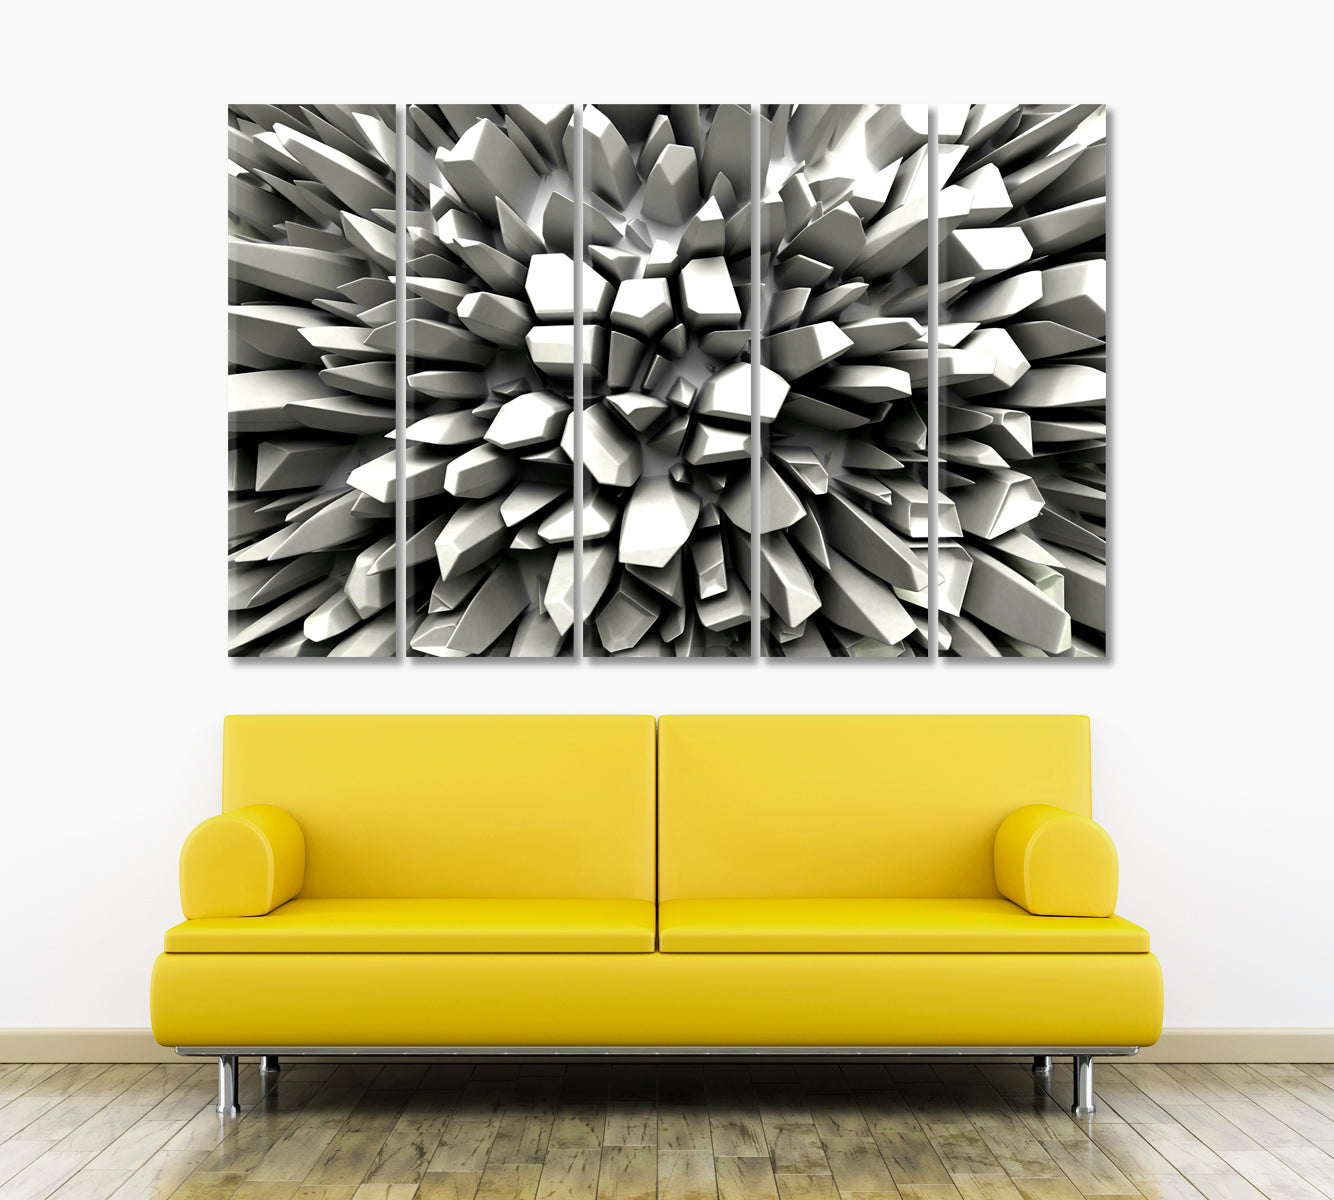 Abstract Three-dimension Crystallized Rays 3D Effect Shapes Poster Abstract Art Print Artesty 5 panels 36" x 24" 